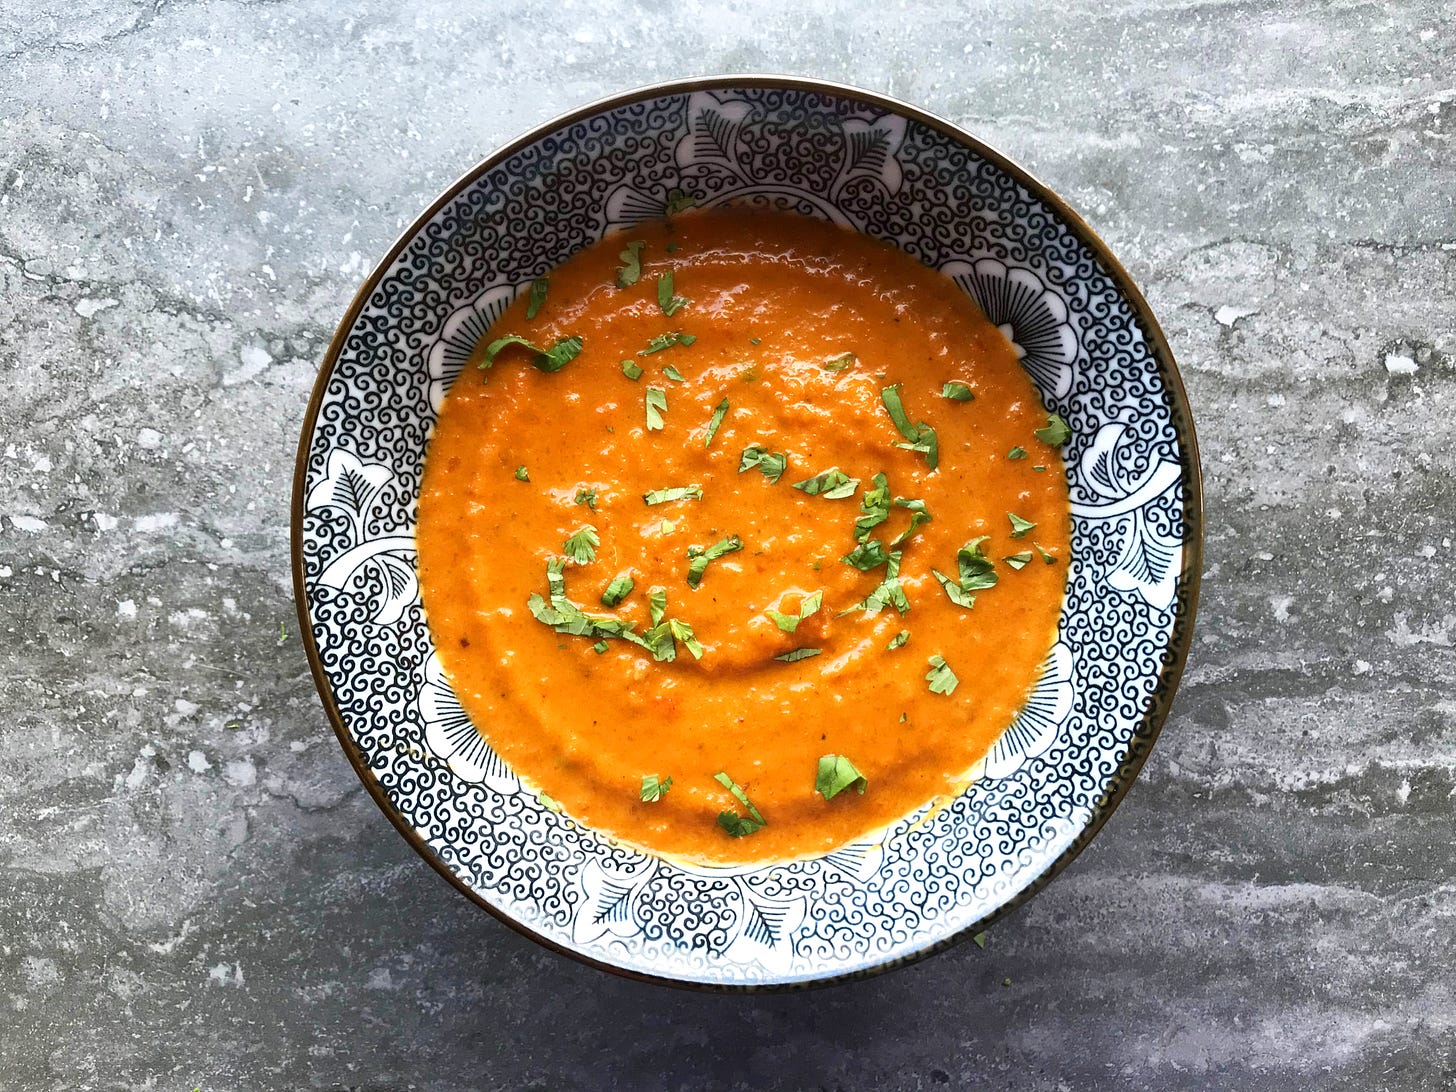 A bowl of Roasted Honey-Harissa Carrot Soup, flecked with minced coriander. The bowl's inside is a black line drawing in a floral pattern, which contrasts against the bright reddish orange of the soup.